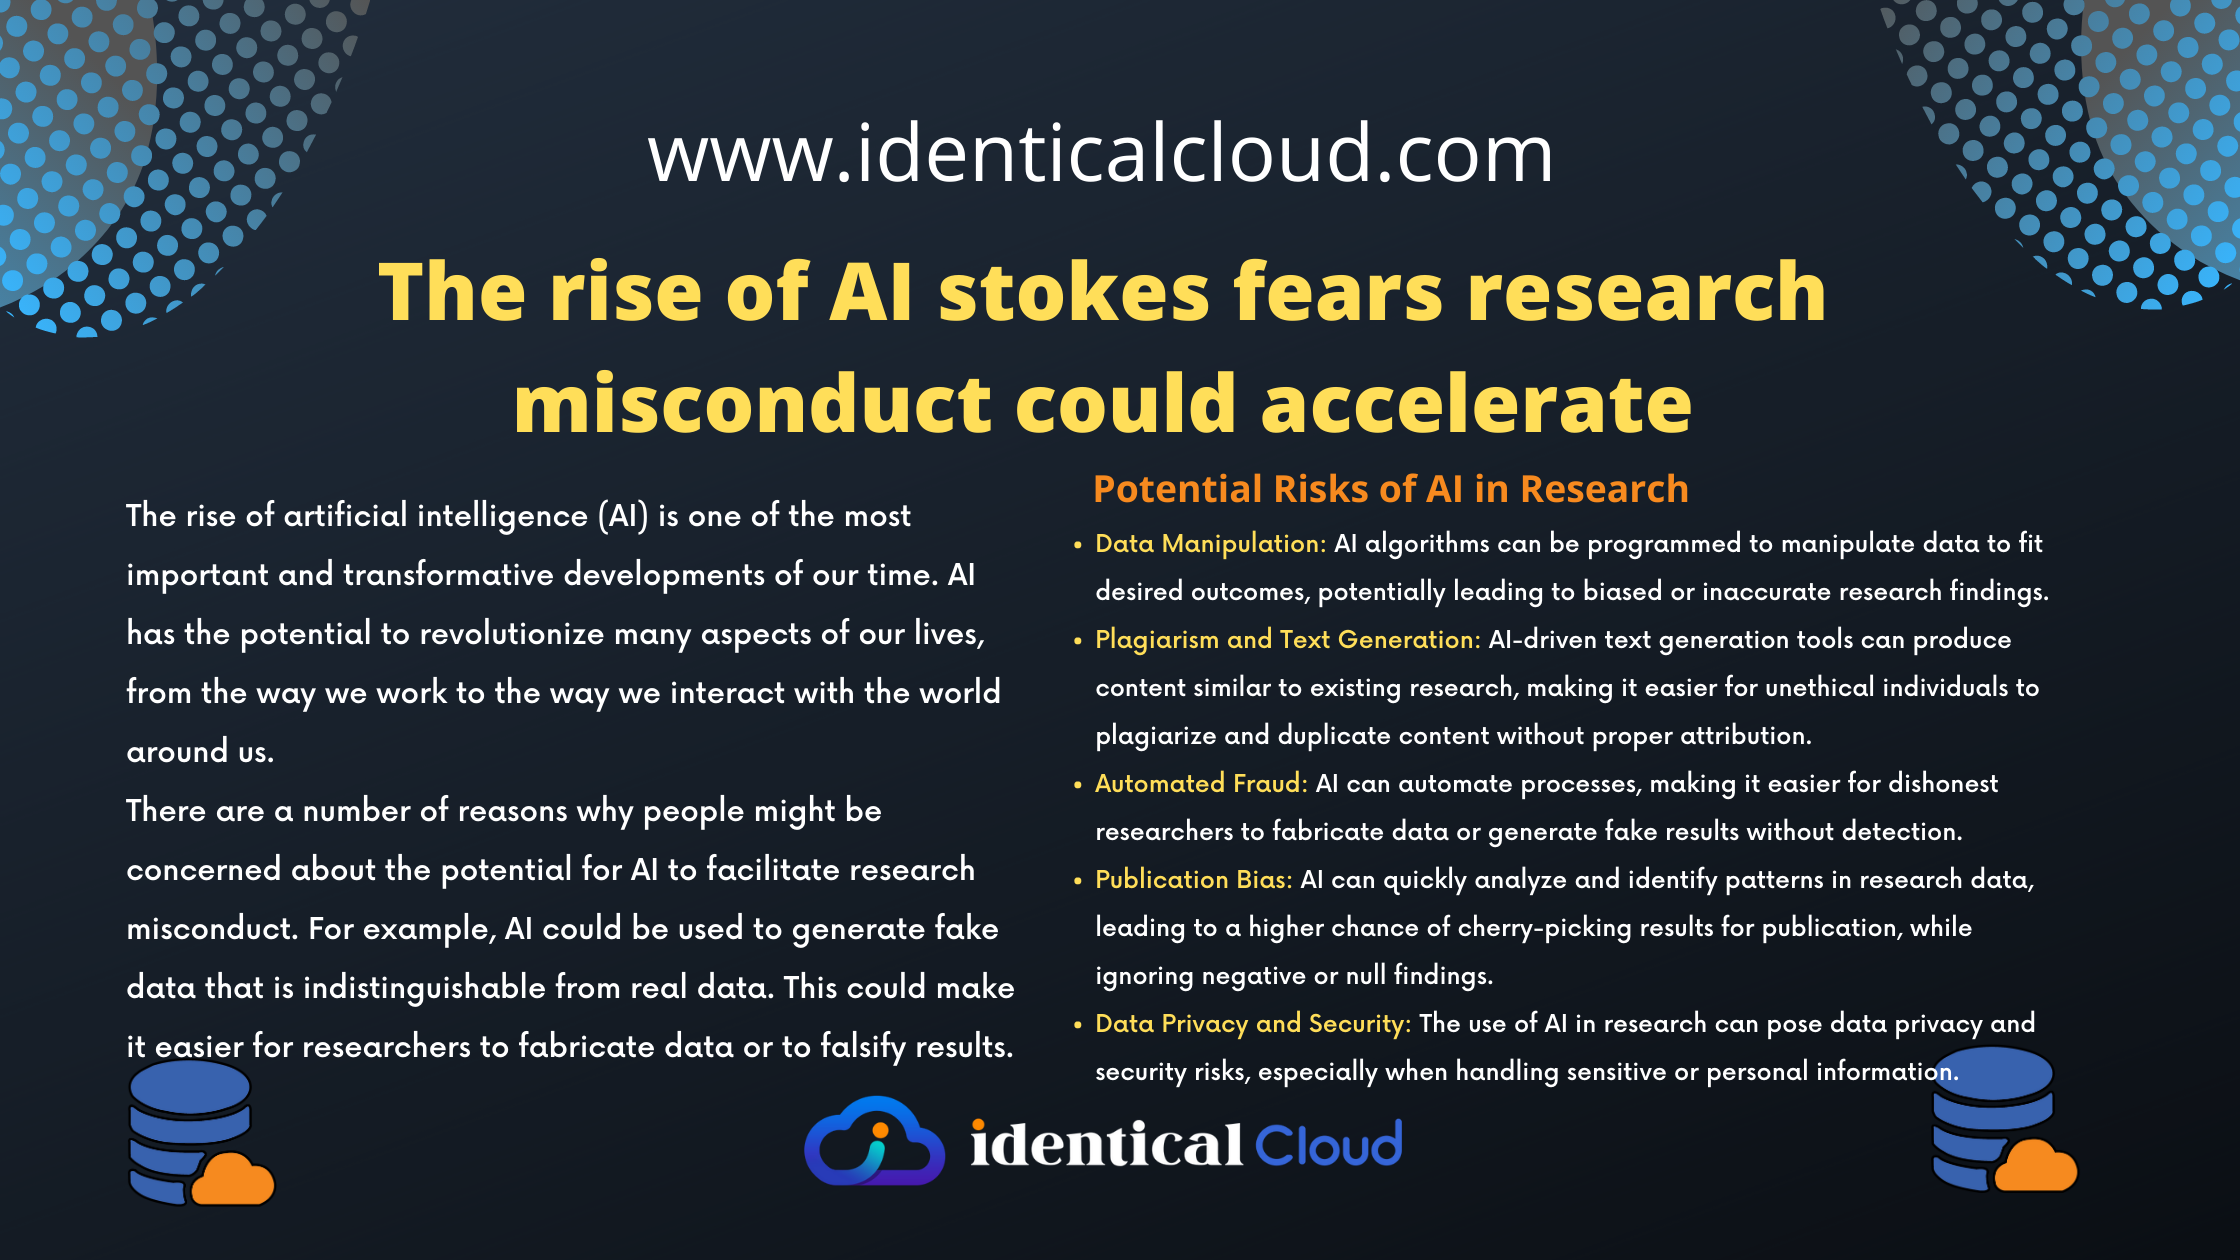 The rise of AI stokes fears research misconduct could accelerate - identicalcloud.com